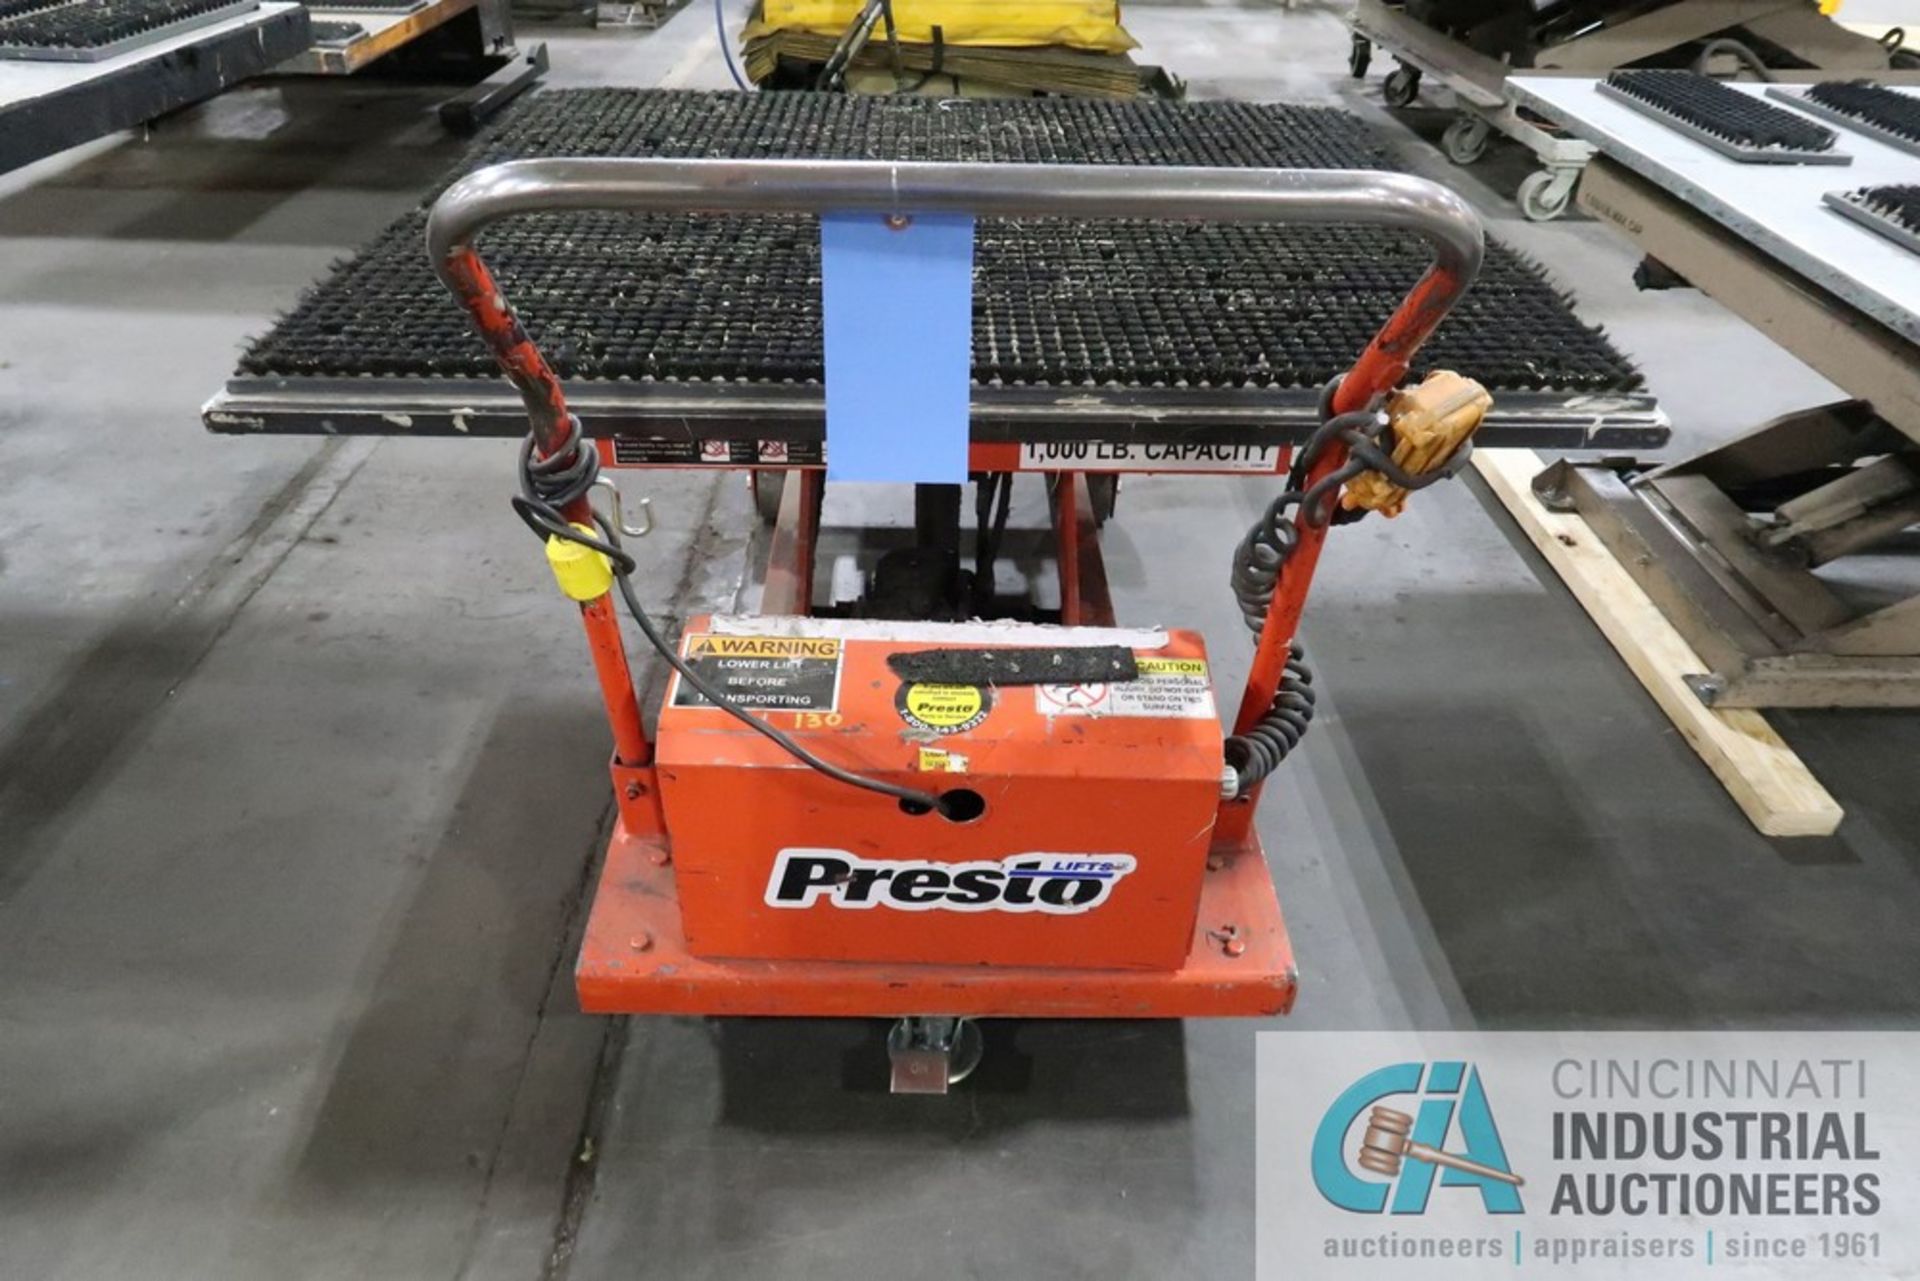 1,000 LB. PRESTO PORTABLE ELECTRIC / HYDRUALIC SCISSOR LIFT TABLE WITH 48' X 51" MOUNTED BRUSH - Image 3 of 3